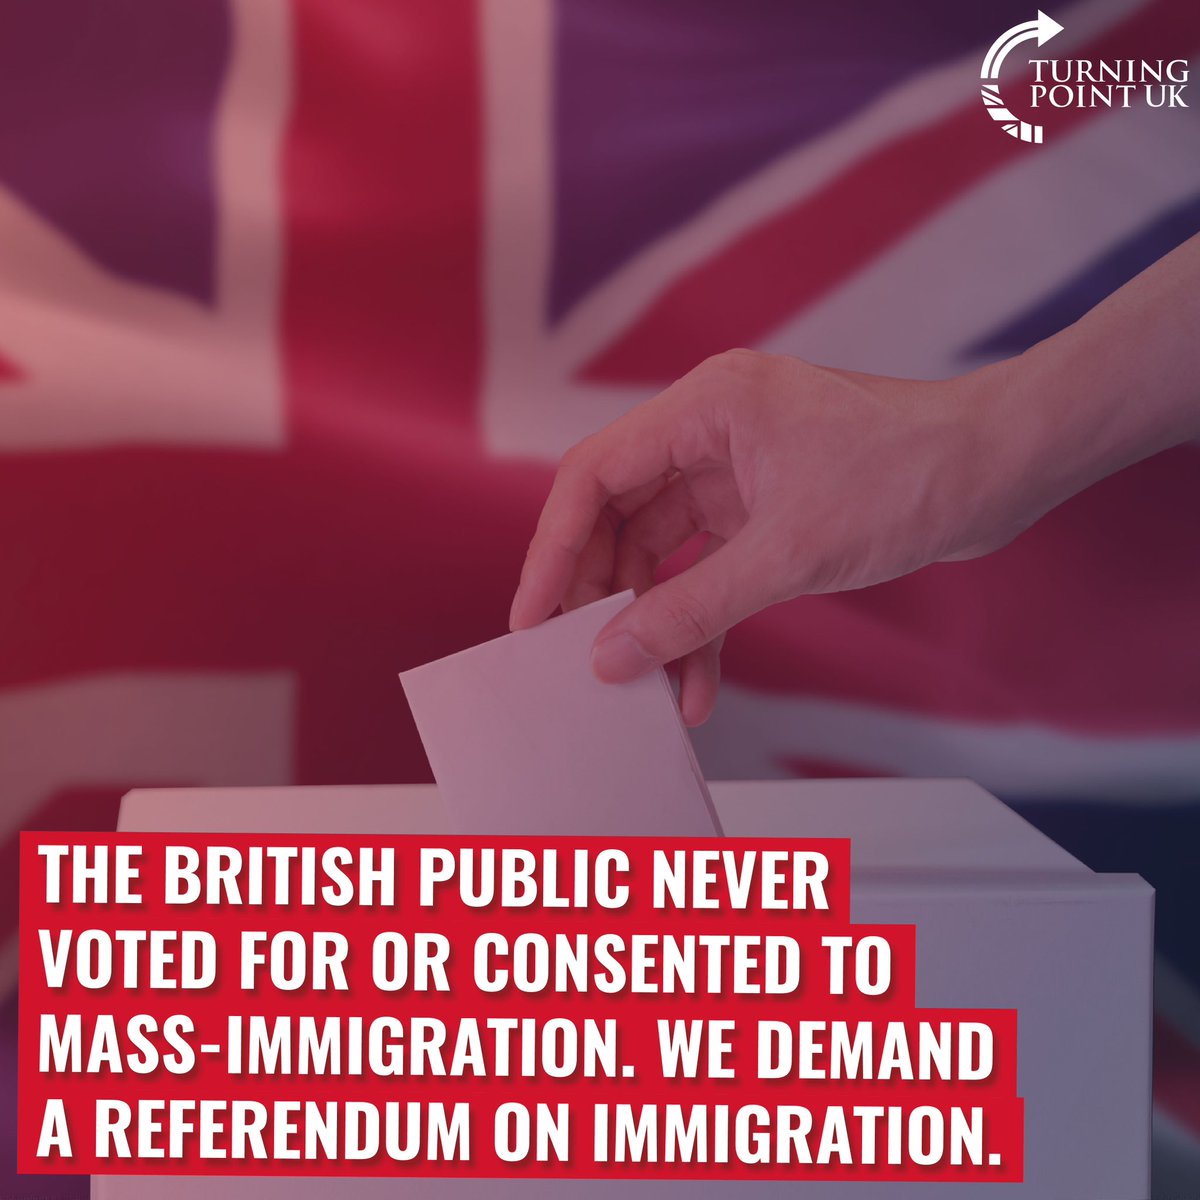 We demand a referendum on immigration. We were never asked. We never voted for mass-immigration.